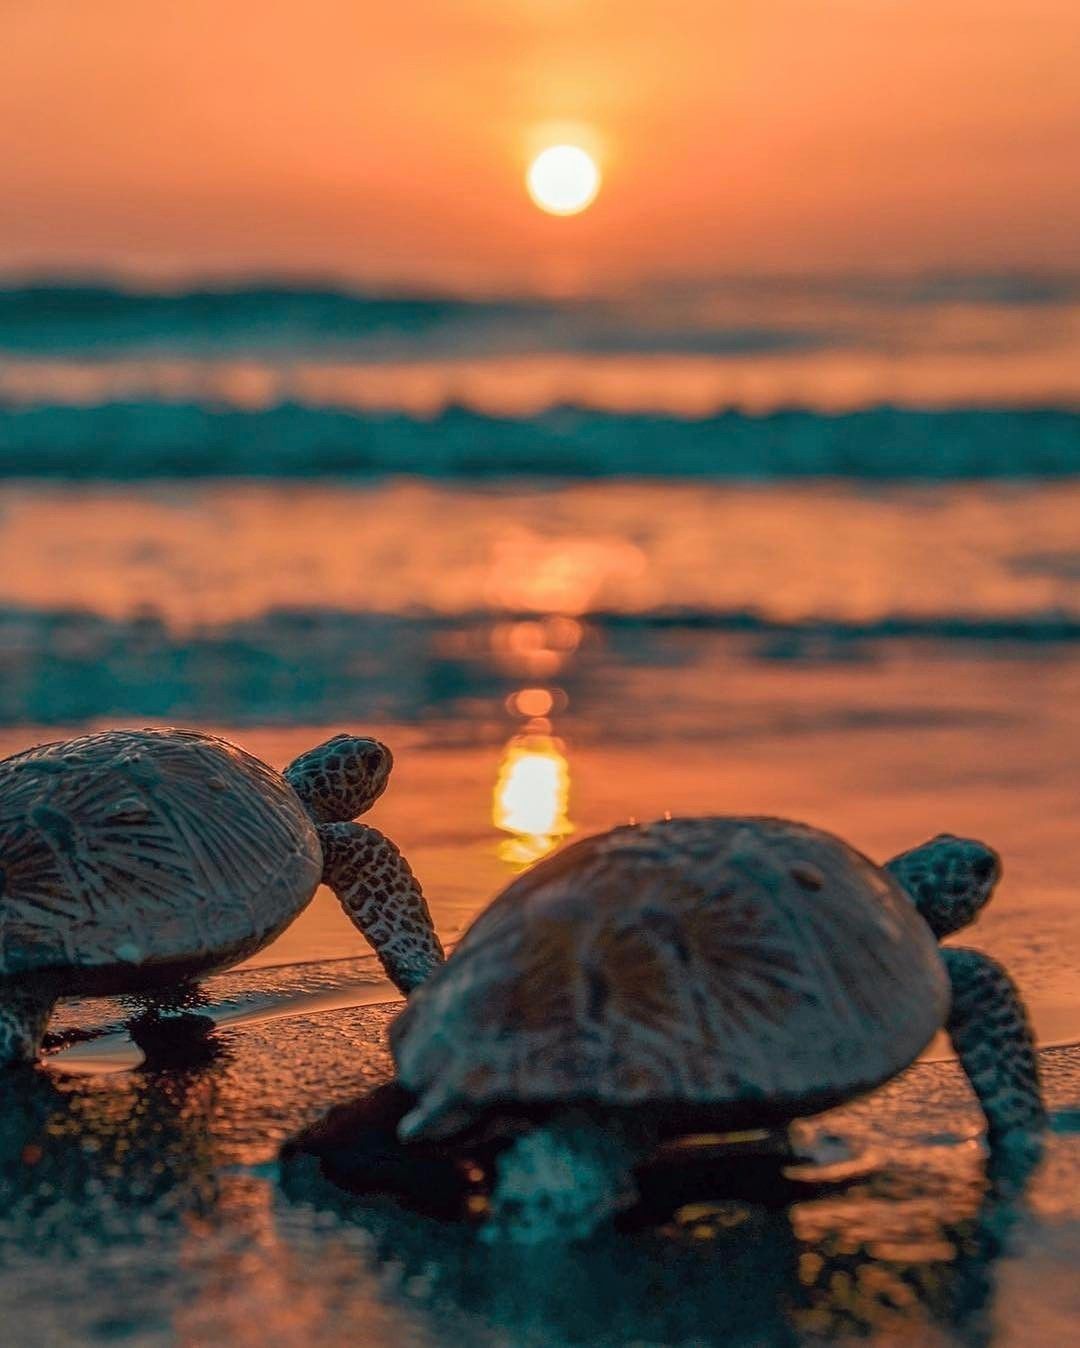 Two turtles walking on the beach at sunset - Sea turtle, turtle